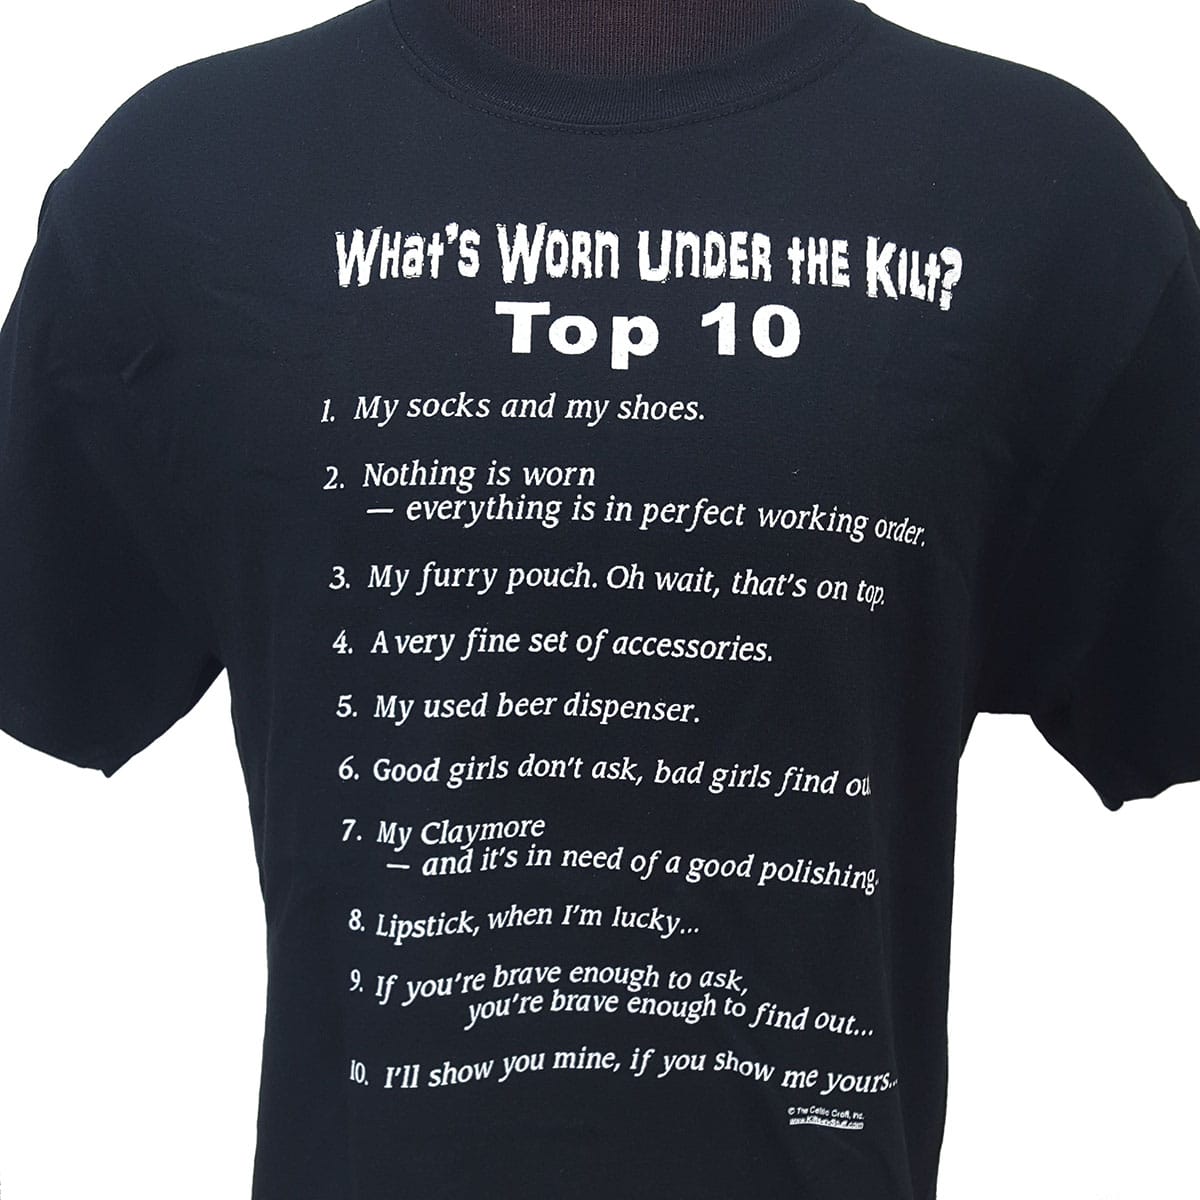 What's Under The Kilt? Top 10 T-Shirt—What's Your Answer